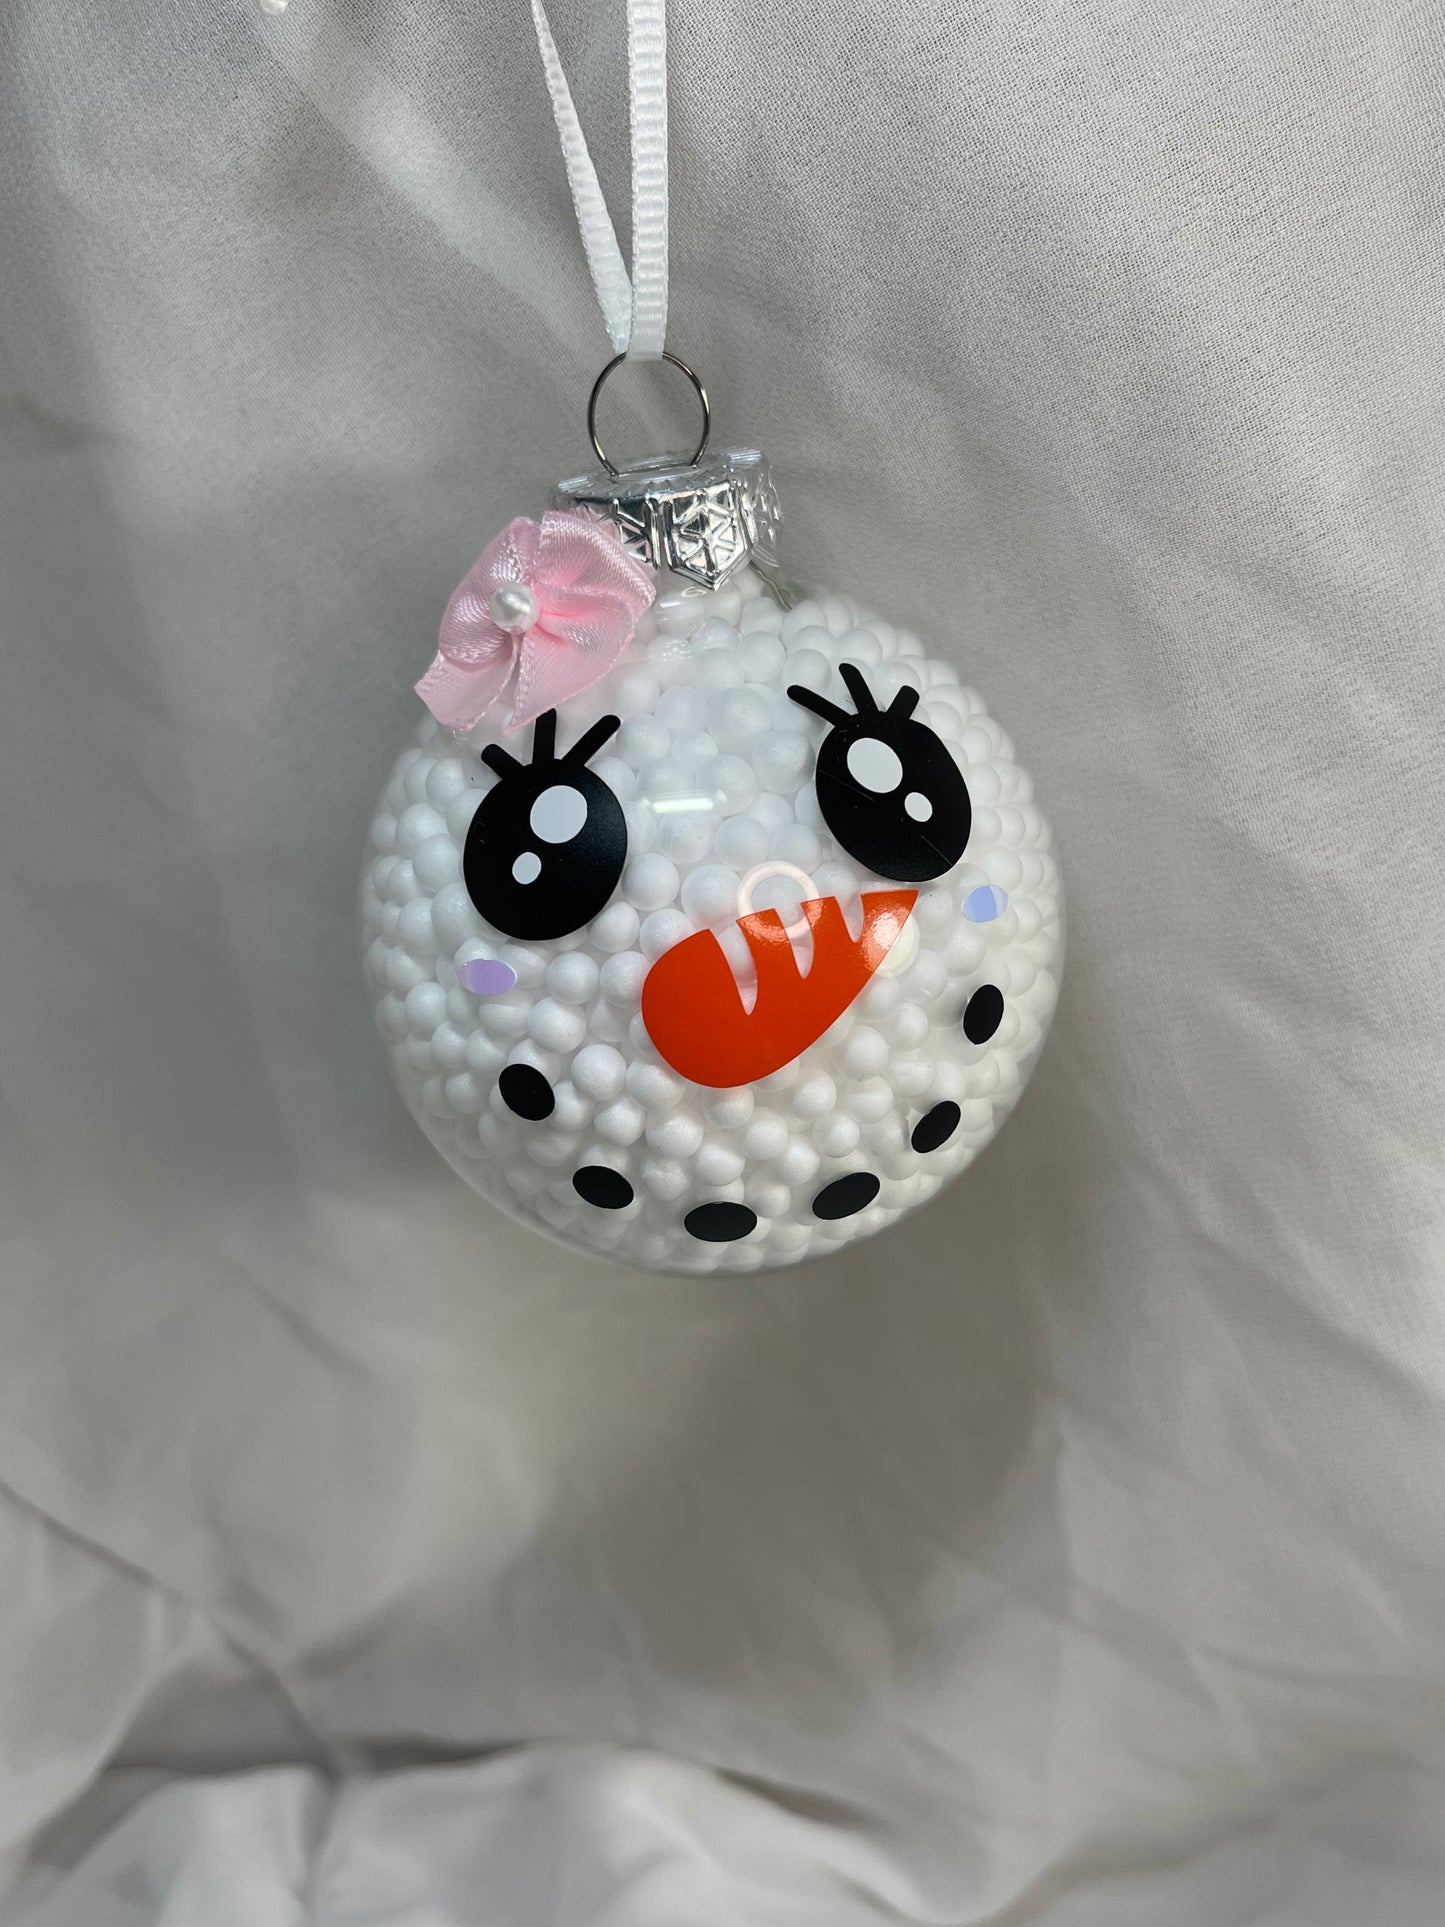 Big Eyed Snow Woman with Pink Bow Snowman Fake Snow Filled Christmas Glass Ornament